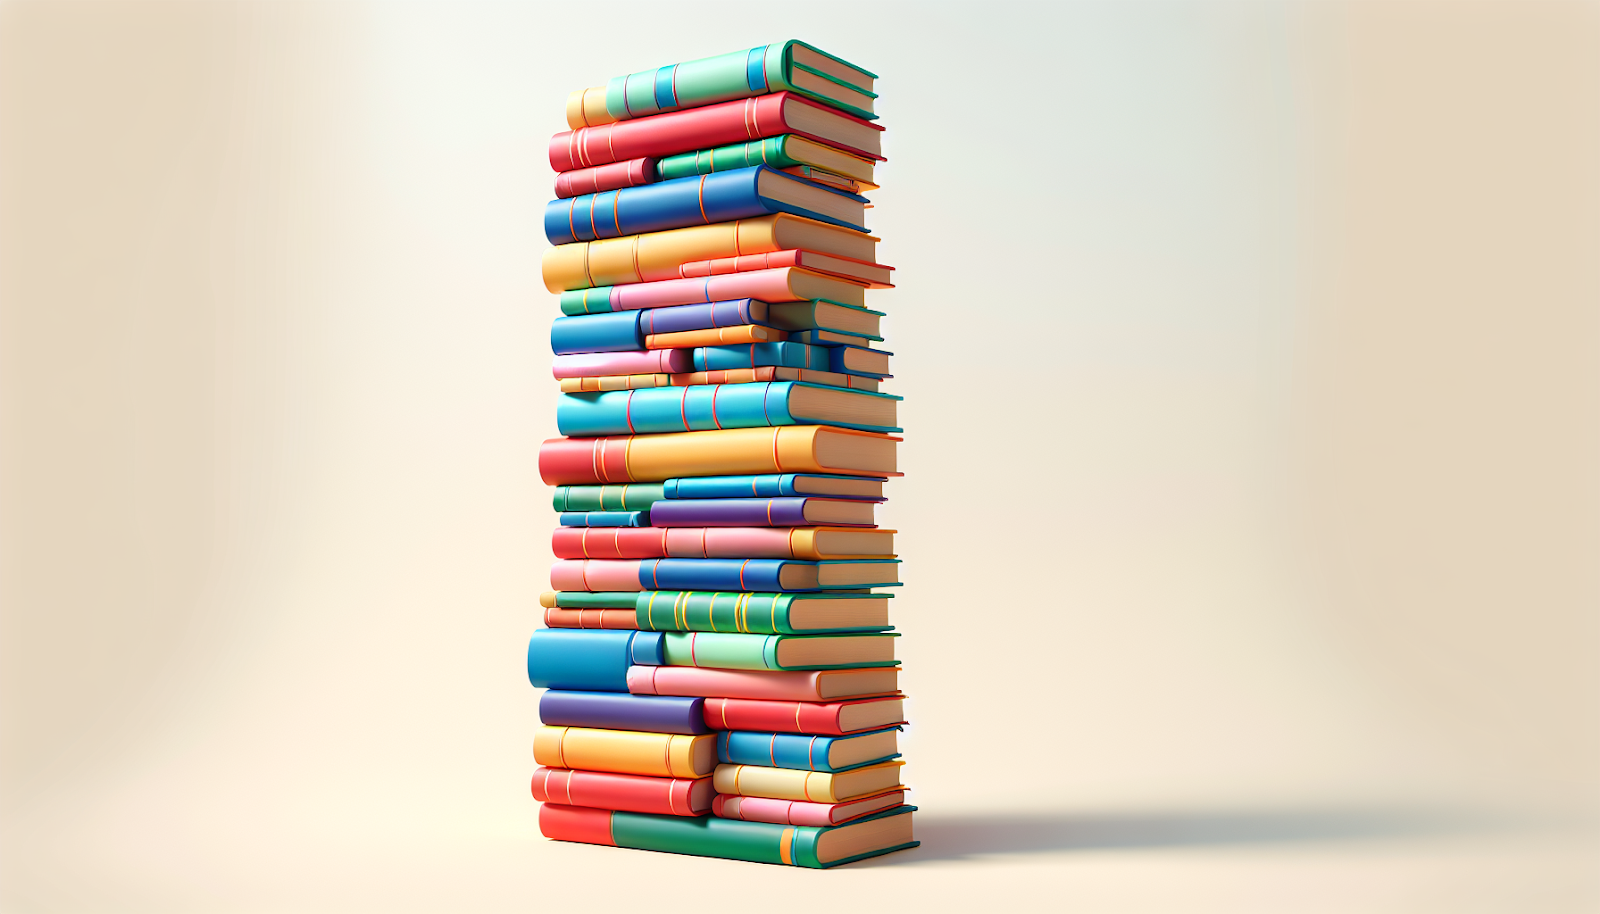 A stack of colorful books representing diverse reading materials